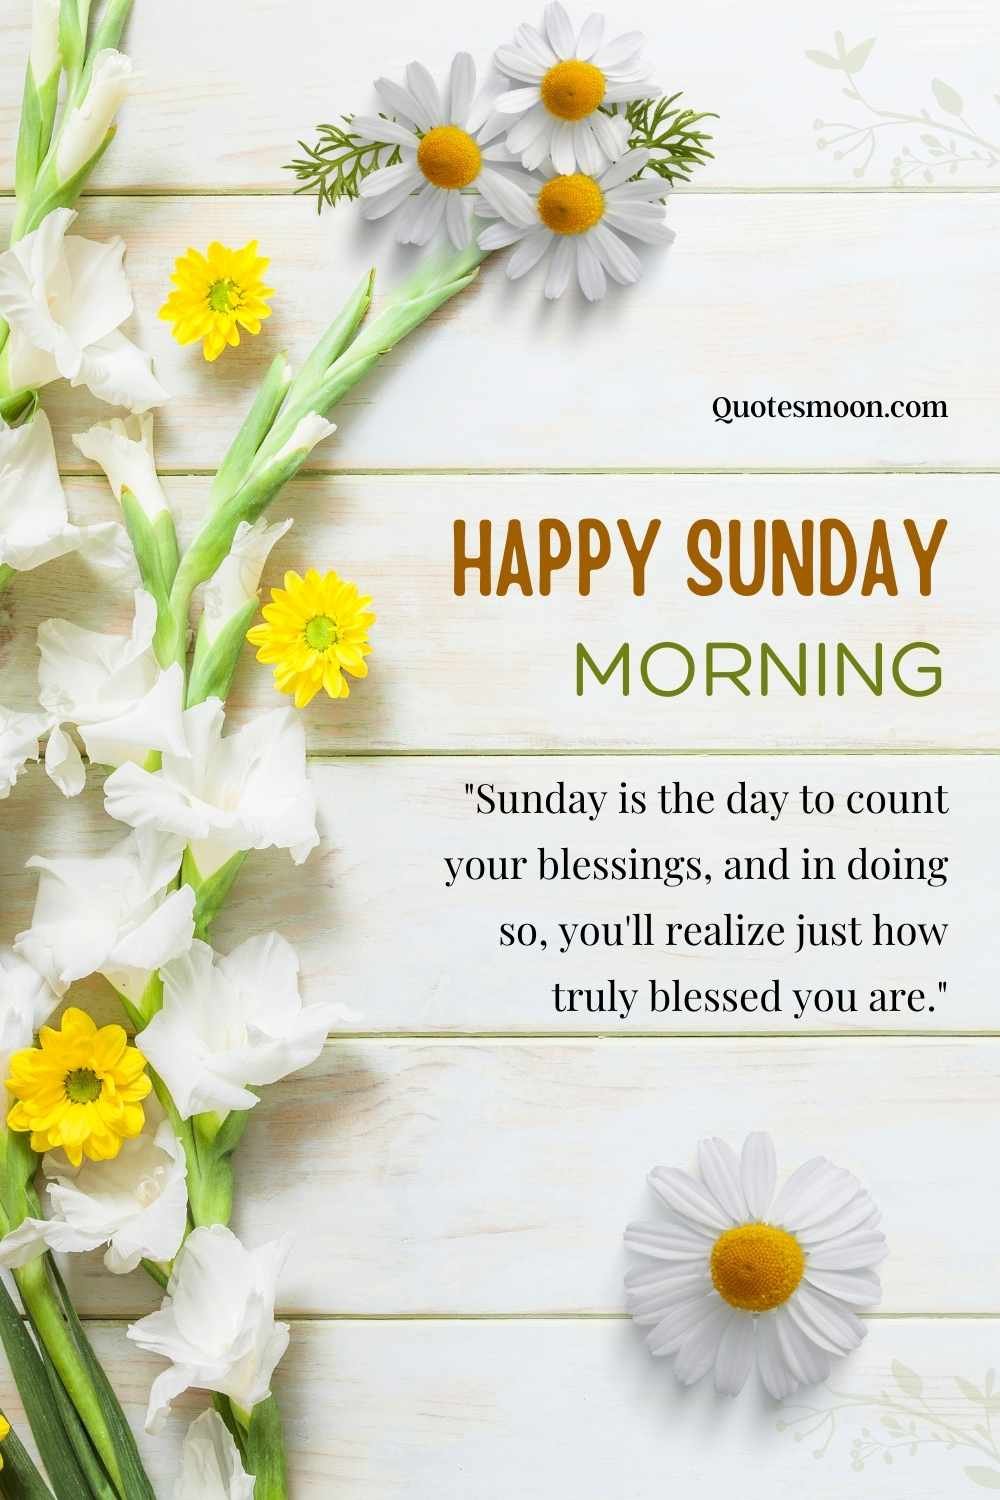 good morning and happy sunday quotes